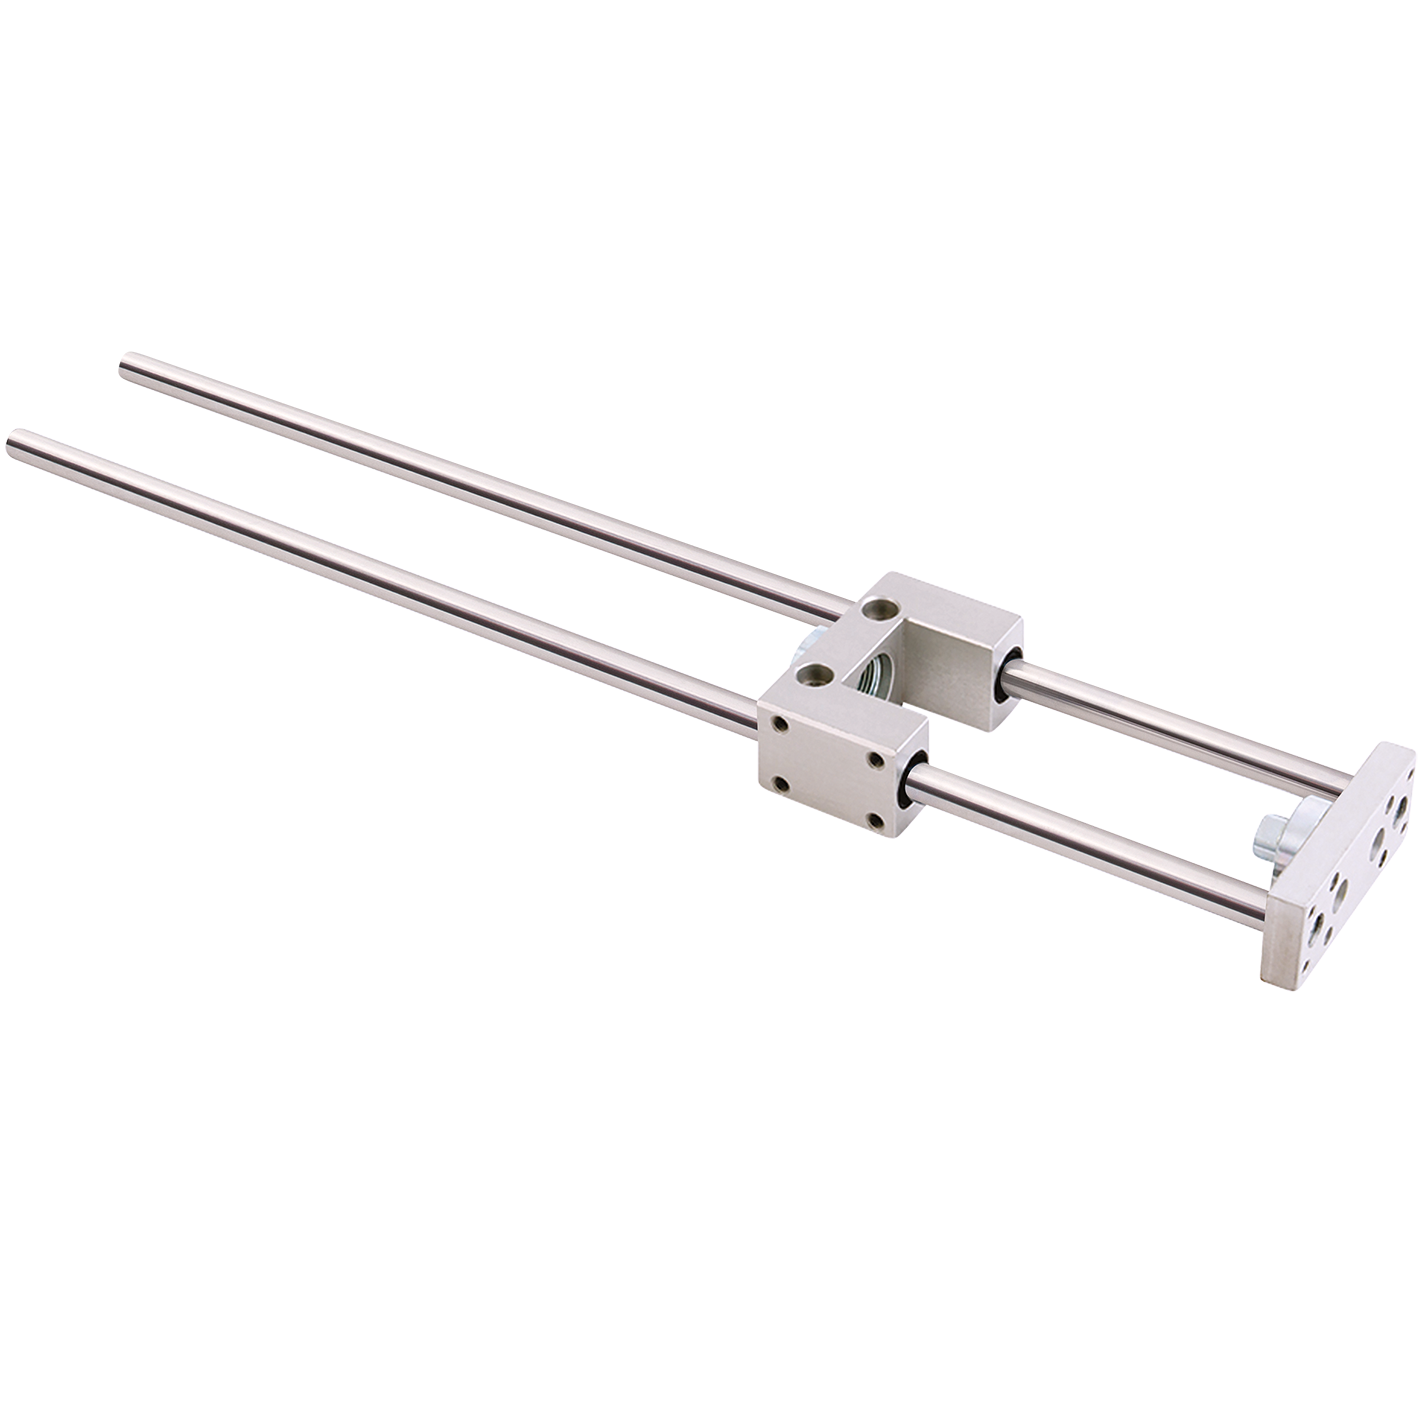 63mm Bore x 500mm Stroke Cylinder Guide Unit